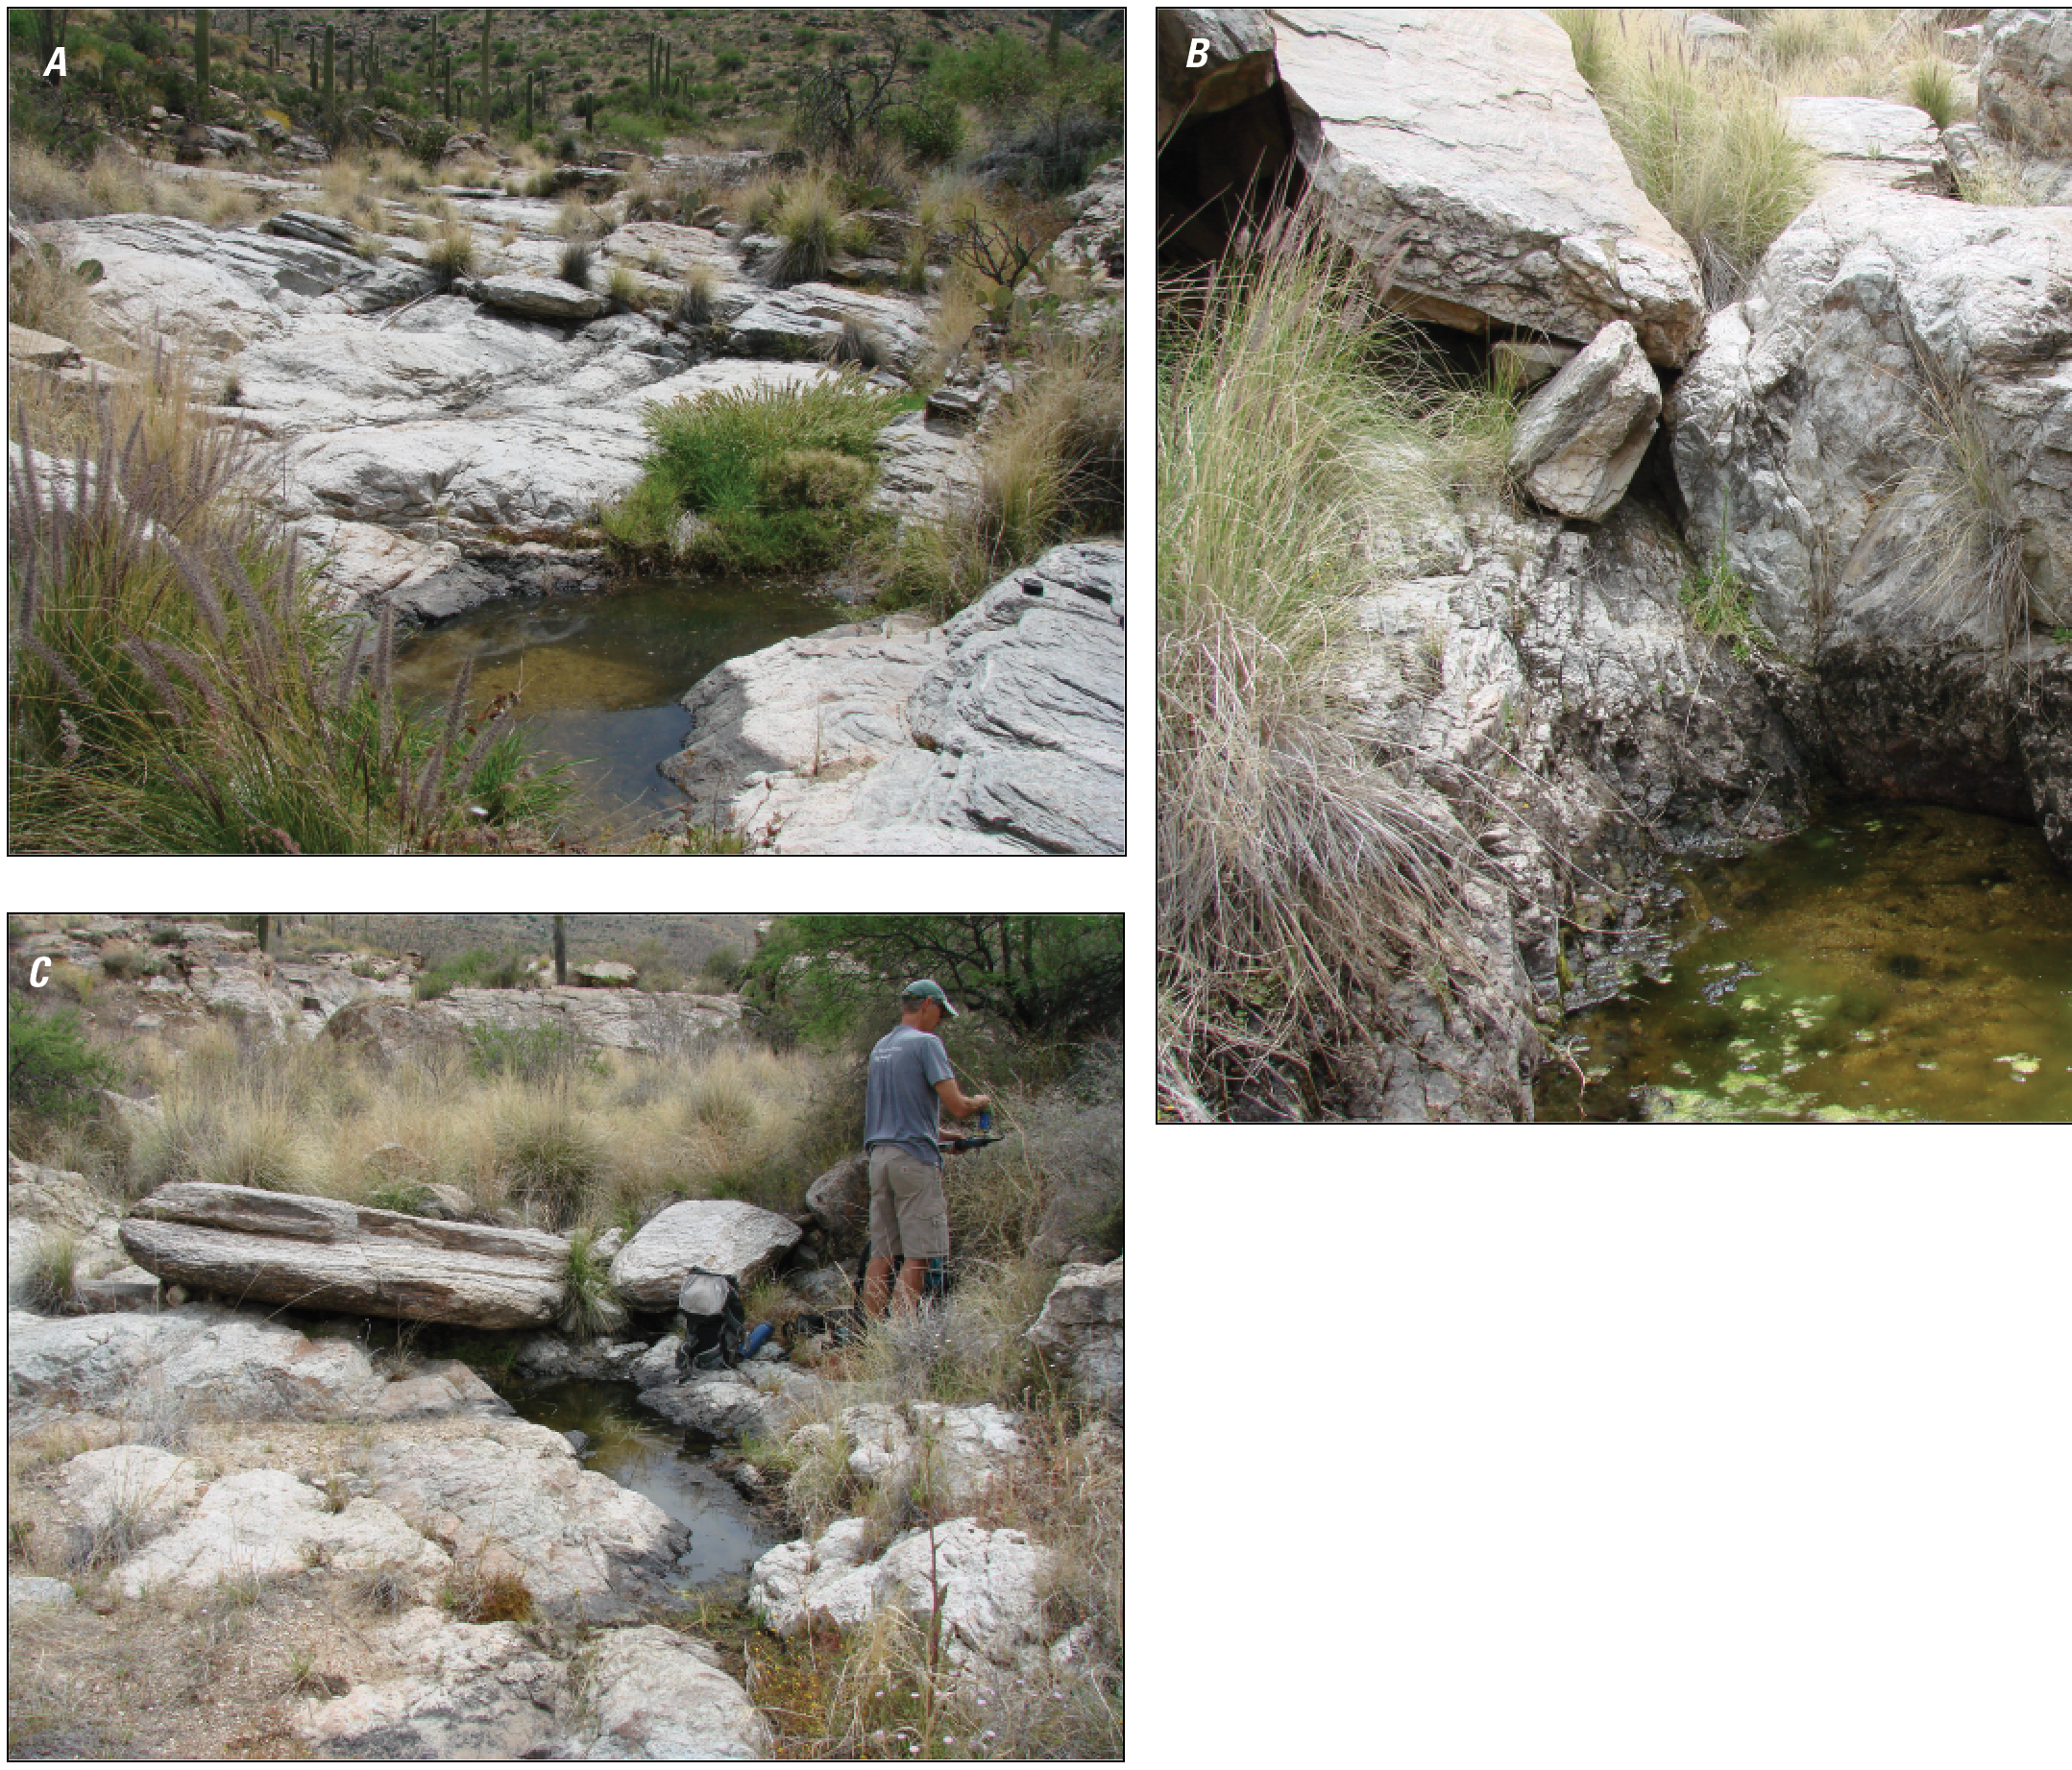 Photographs of Loma Verde canyon pools and sampling locations.